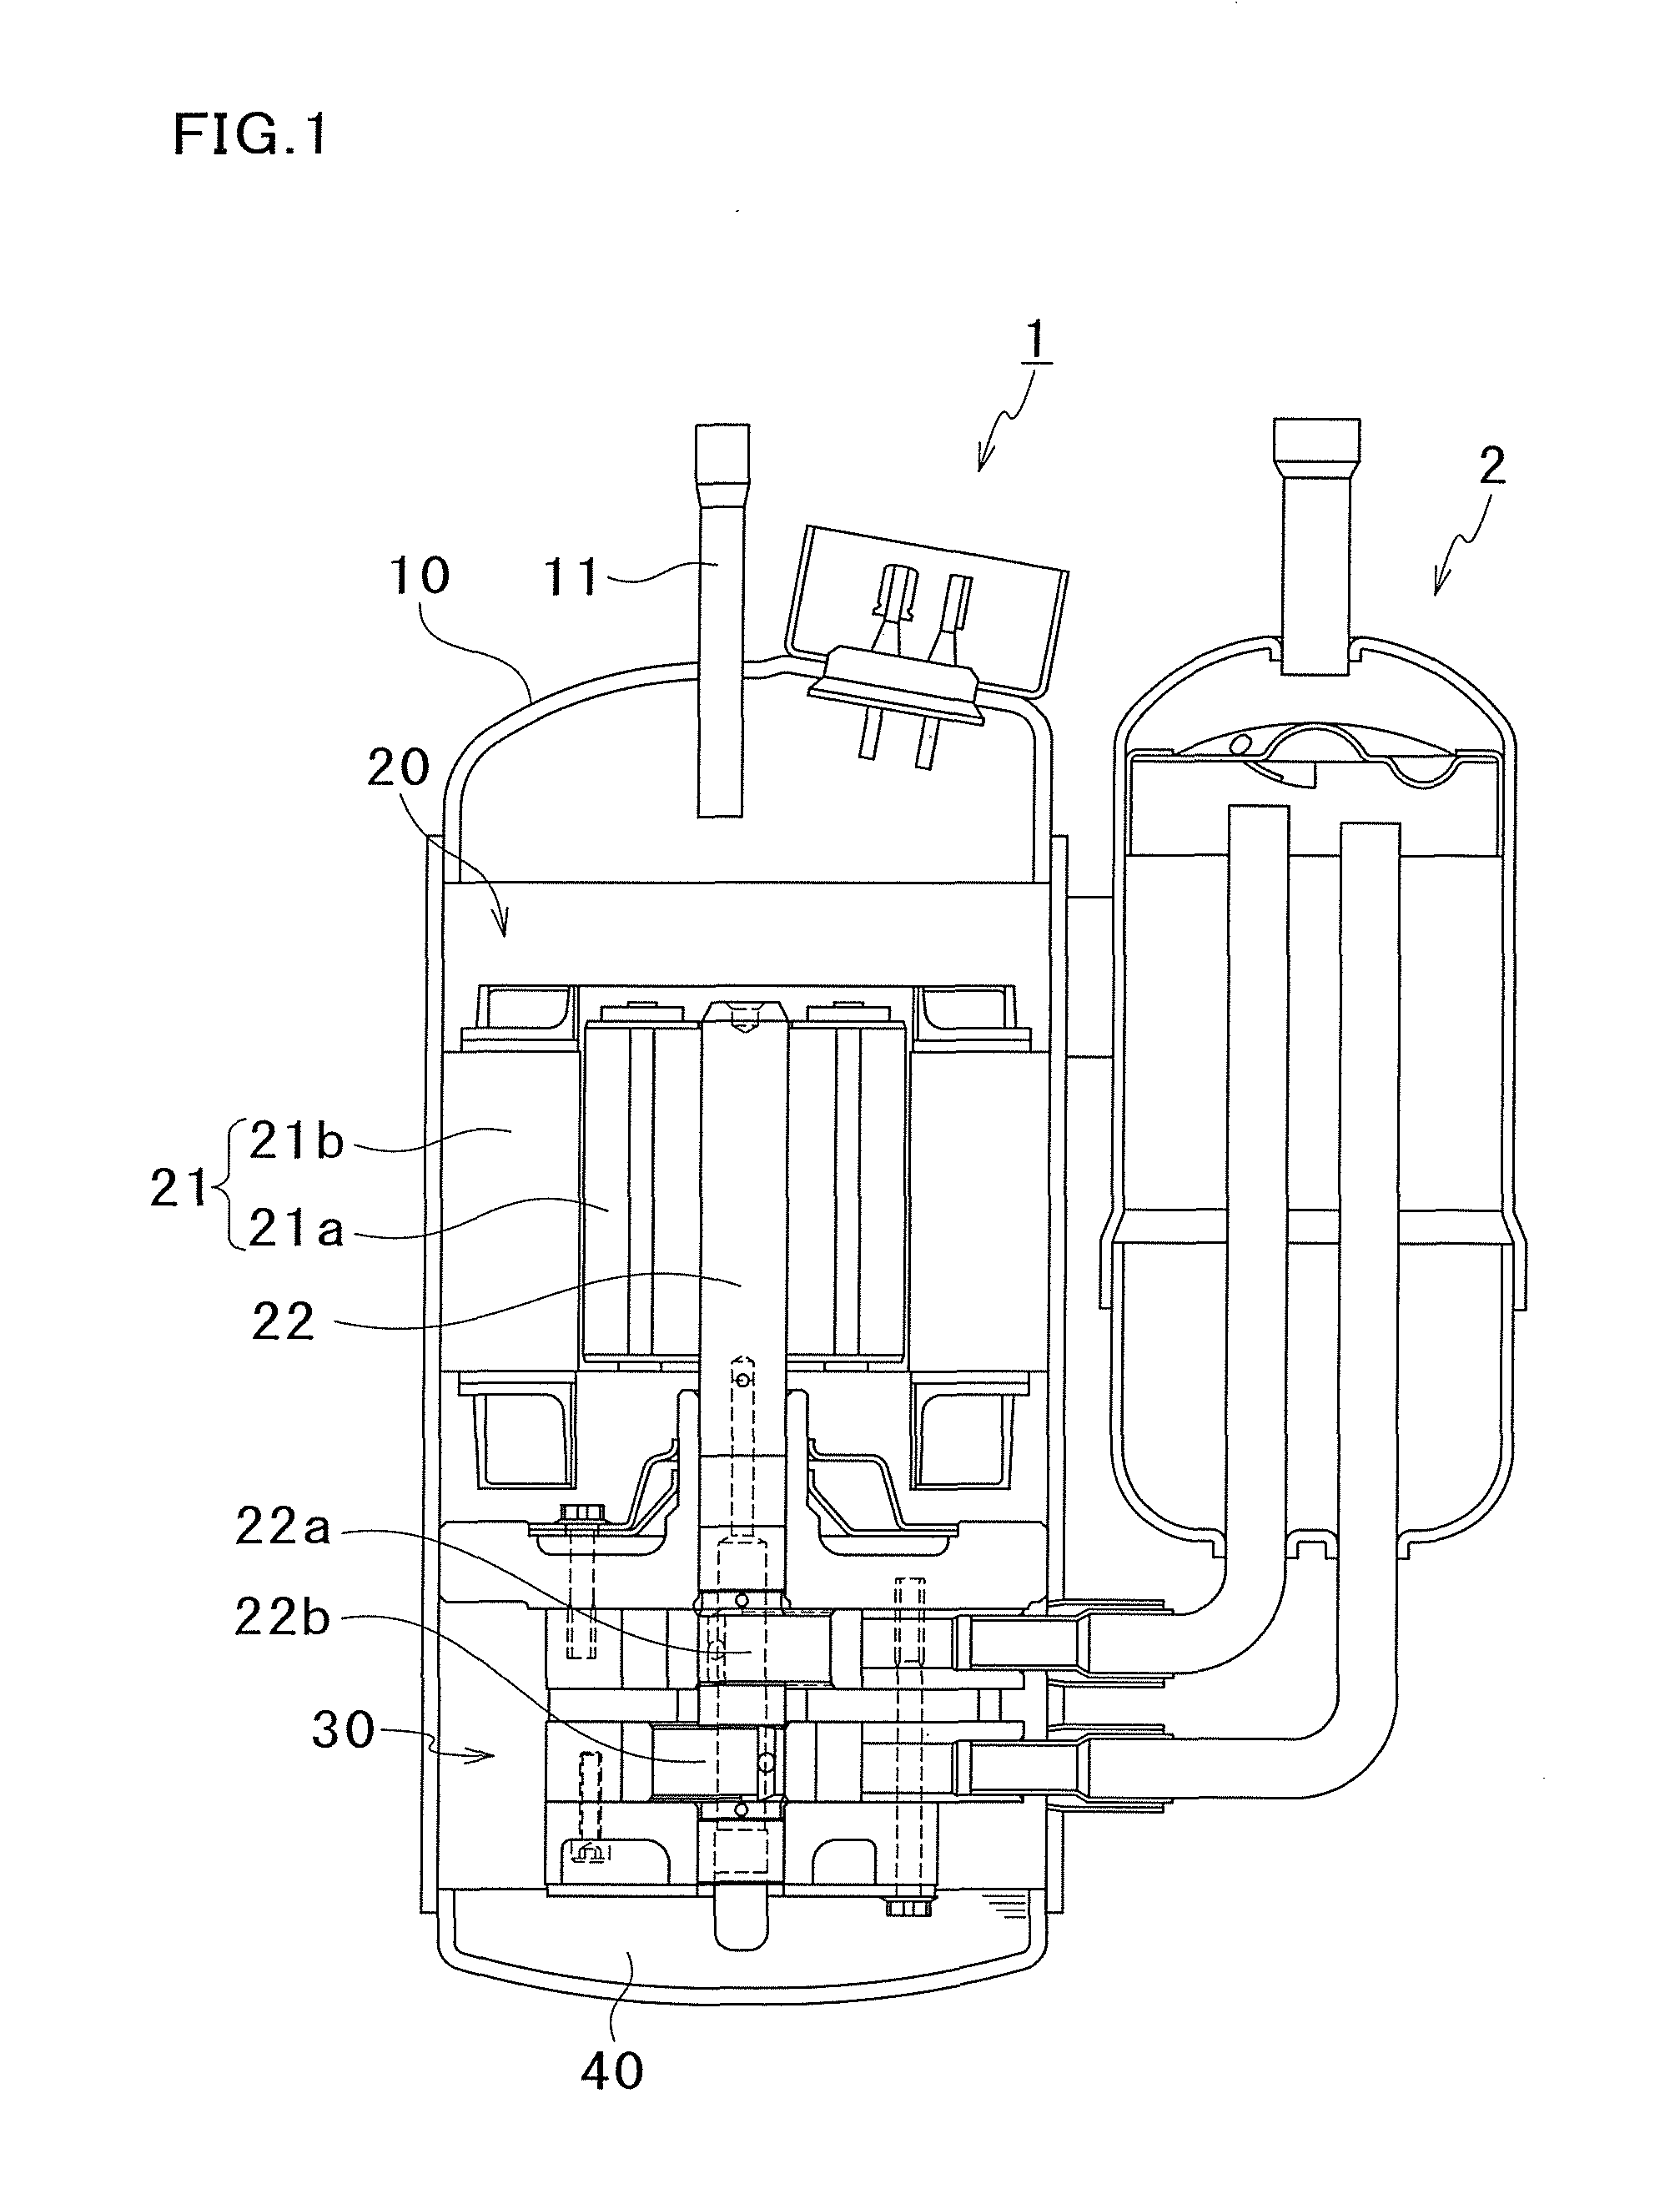 Sealing structure and compressor